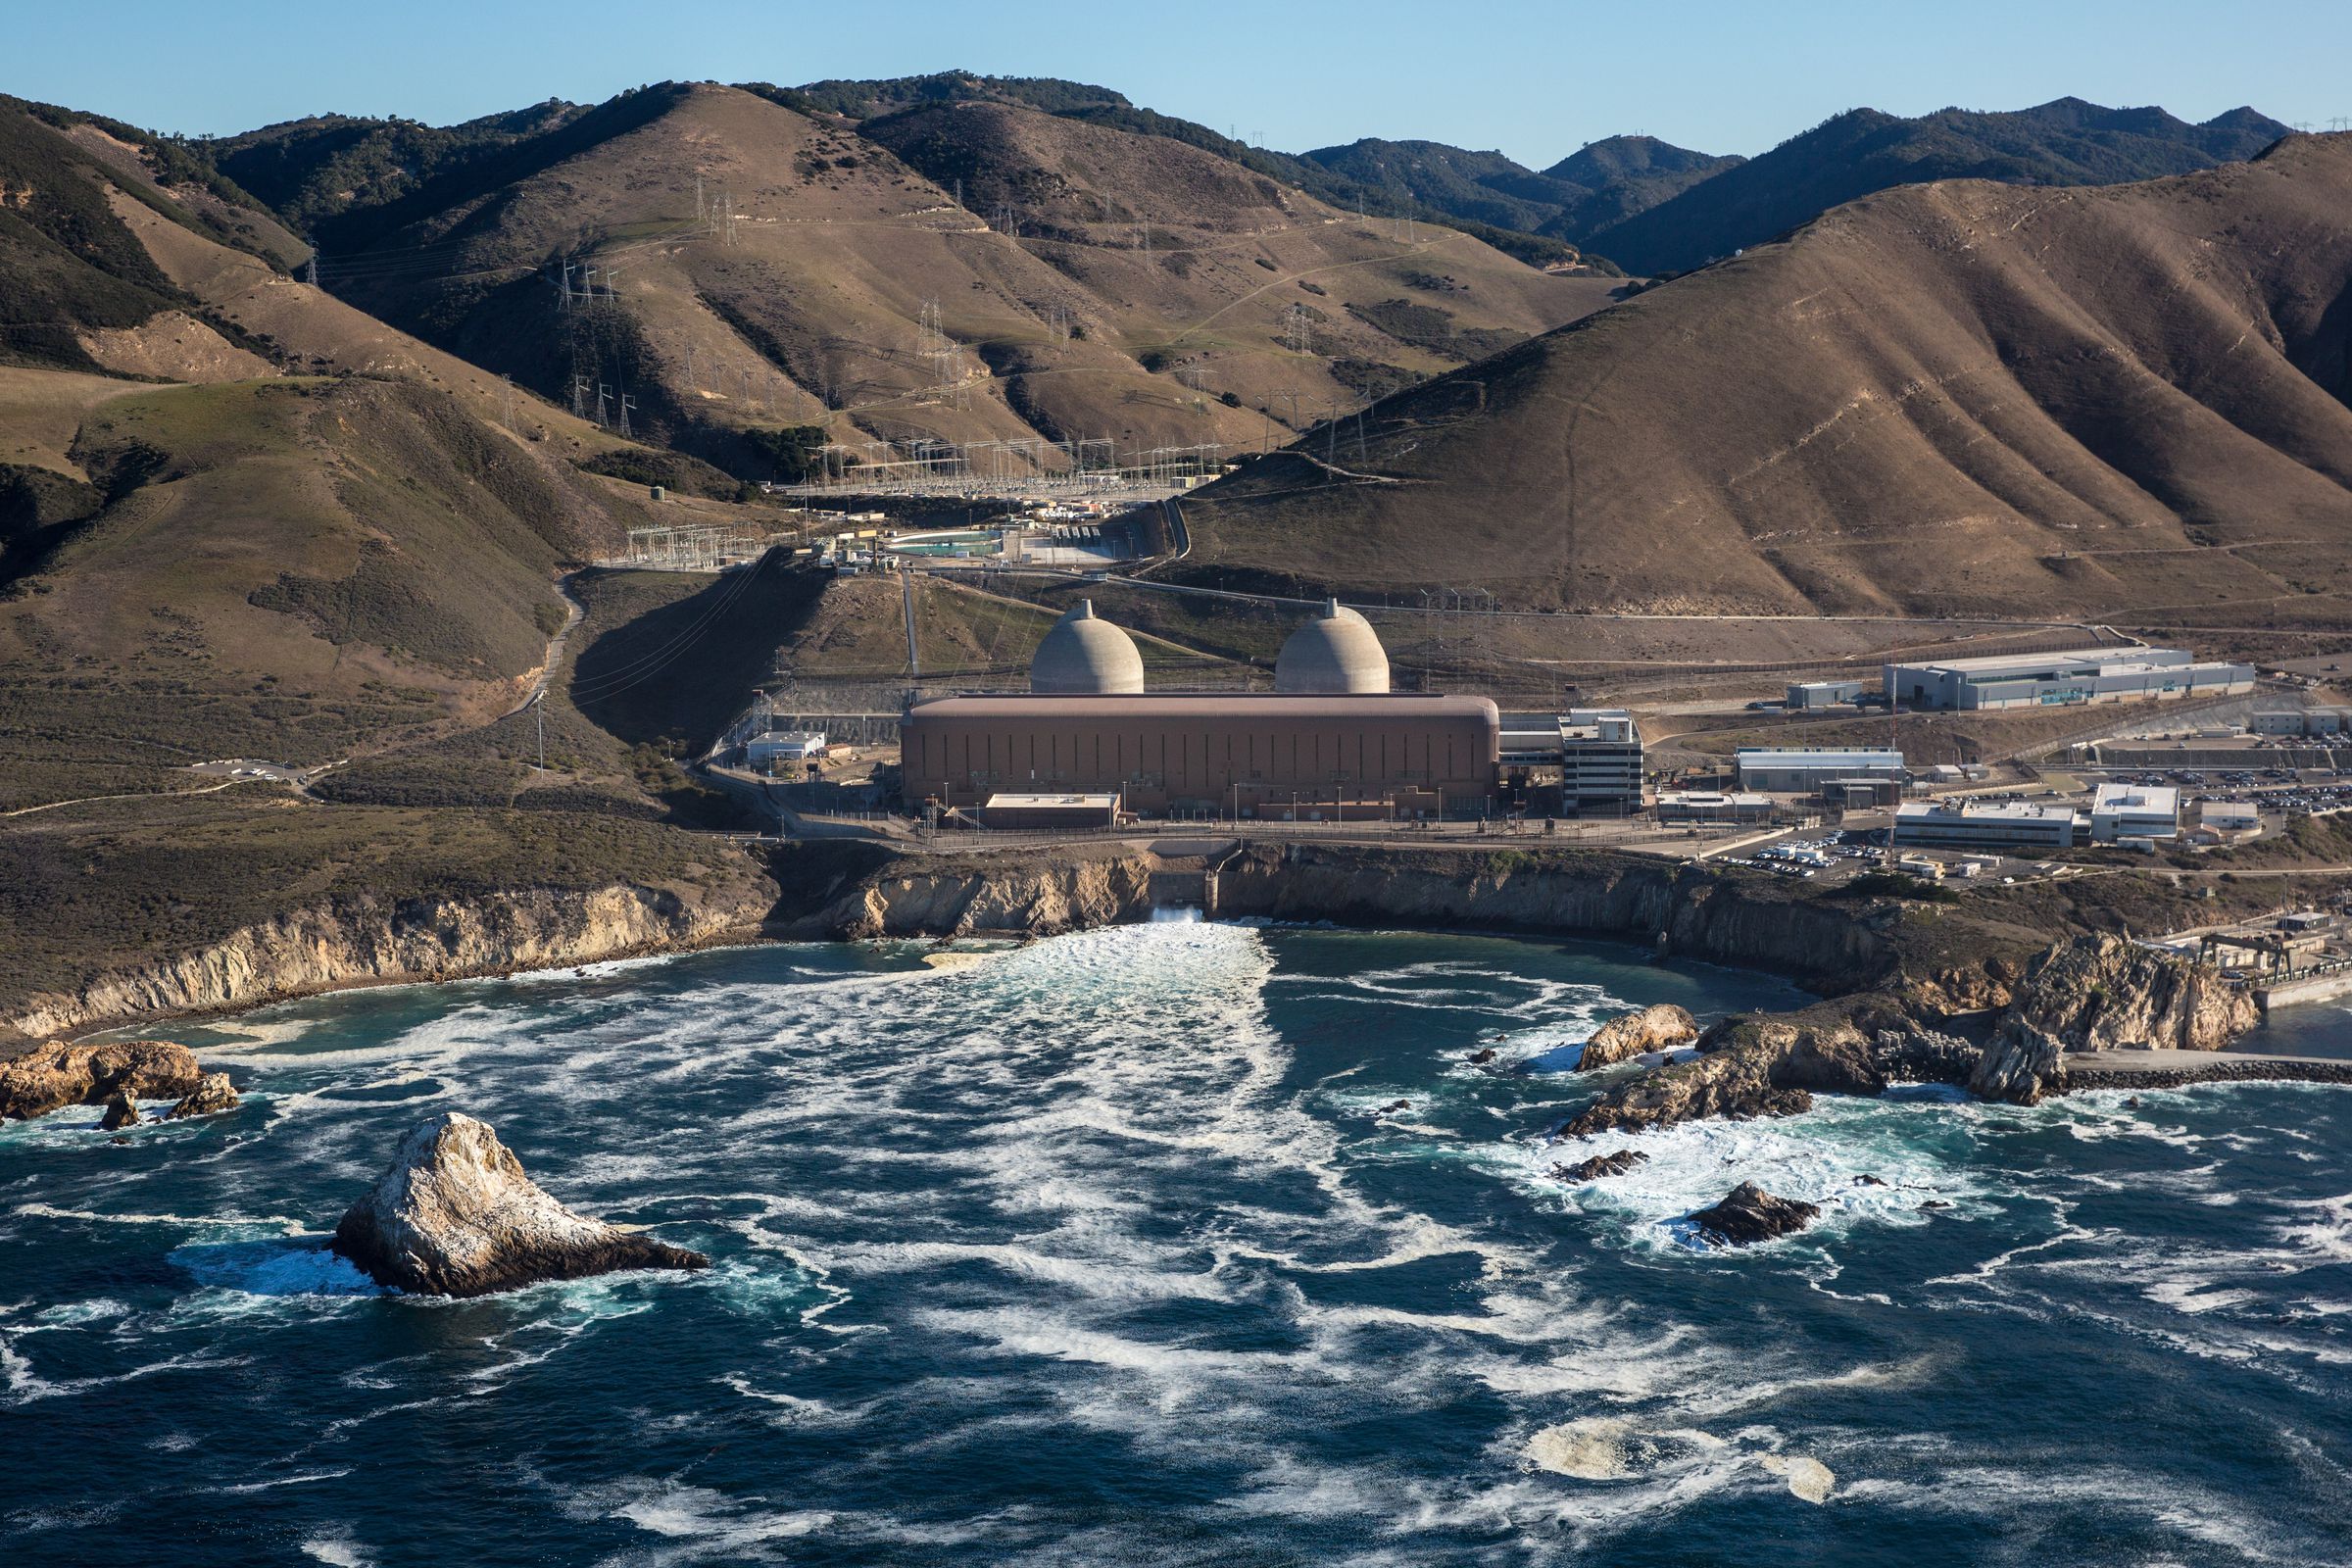 Diablo Canyon nuclear power plant sits on cliffs next to the ocean.